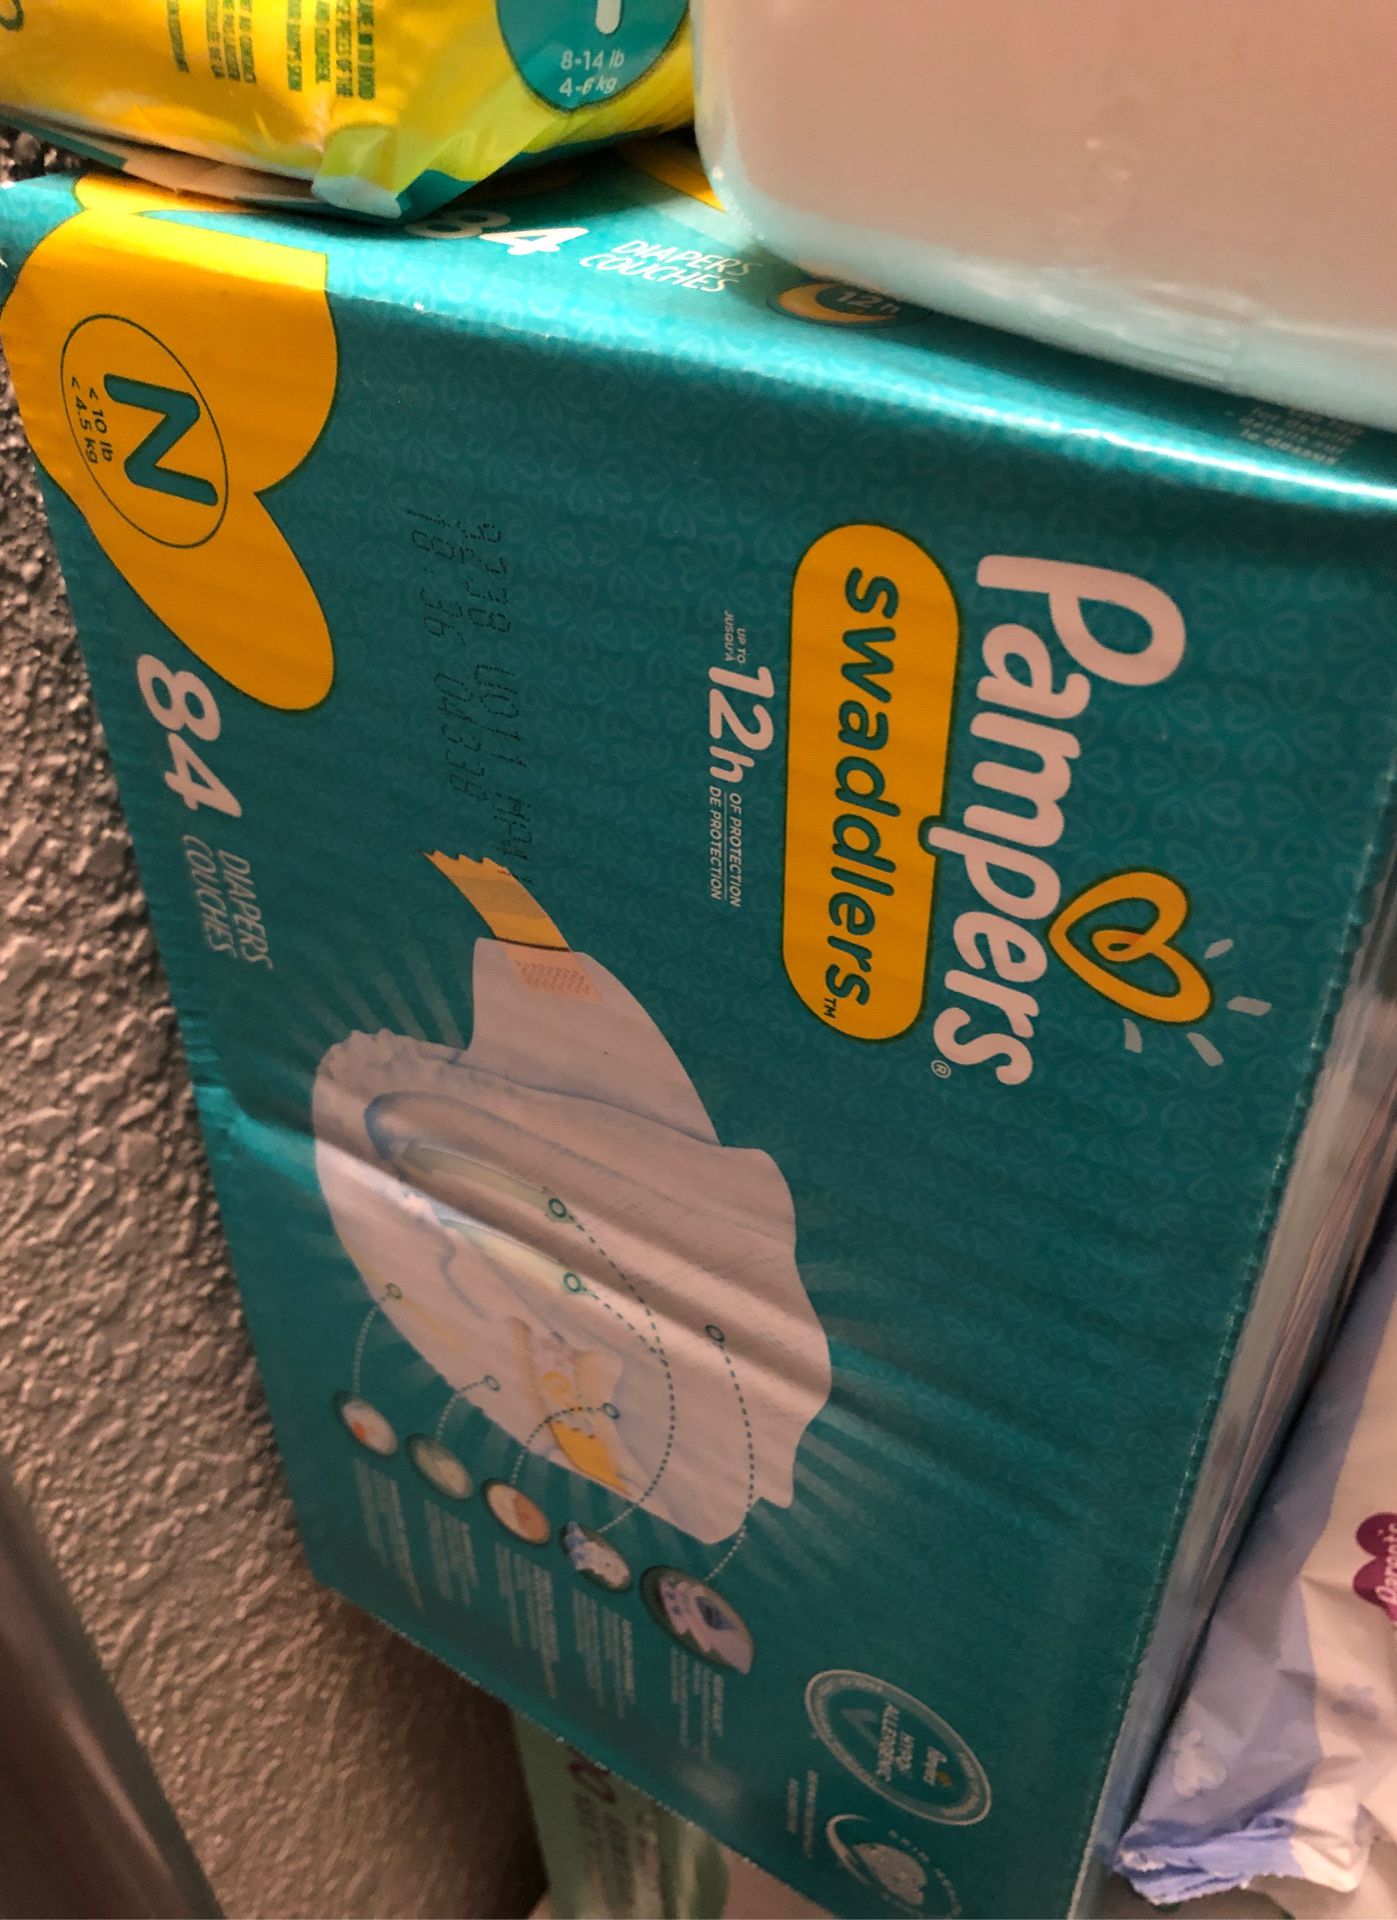 Parent choice /Pampers newborn diapers